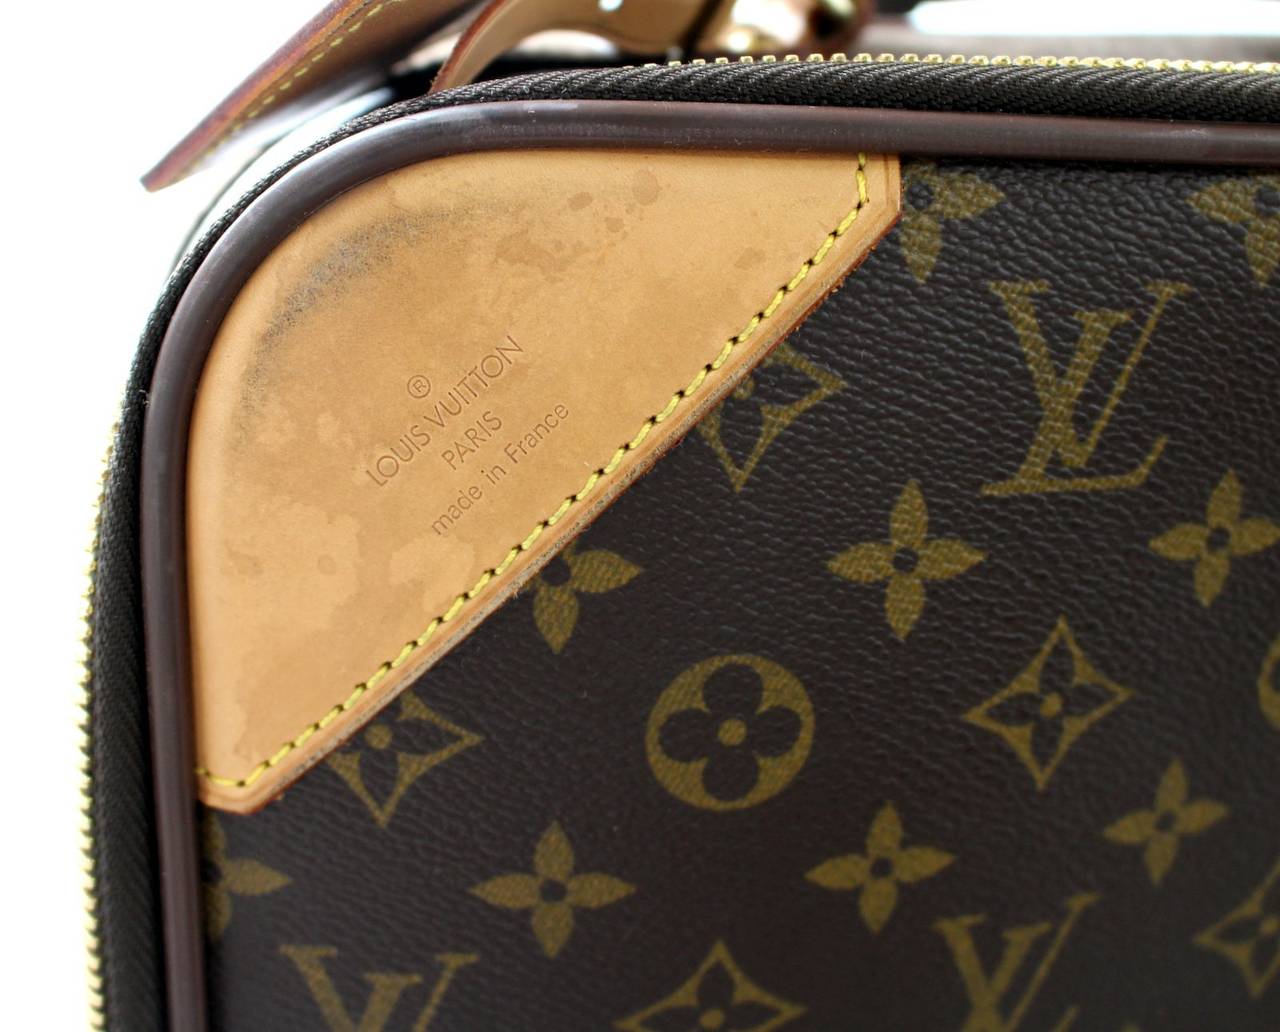 Louis Vuitton Monogram Canvas Travel Rolling Trolley Luggage 55 at 1stdibs